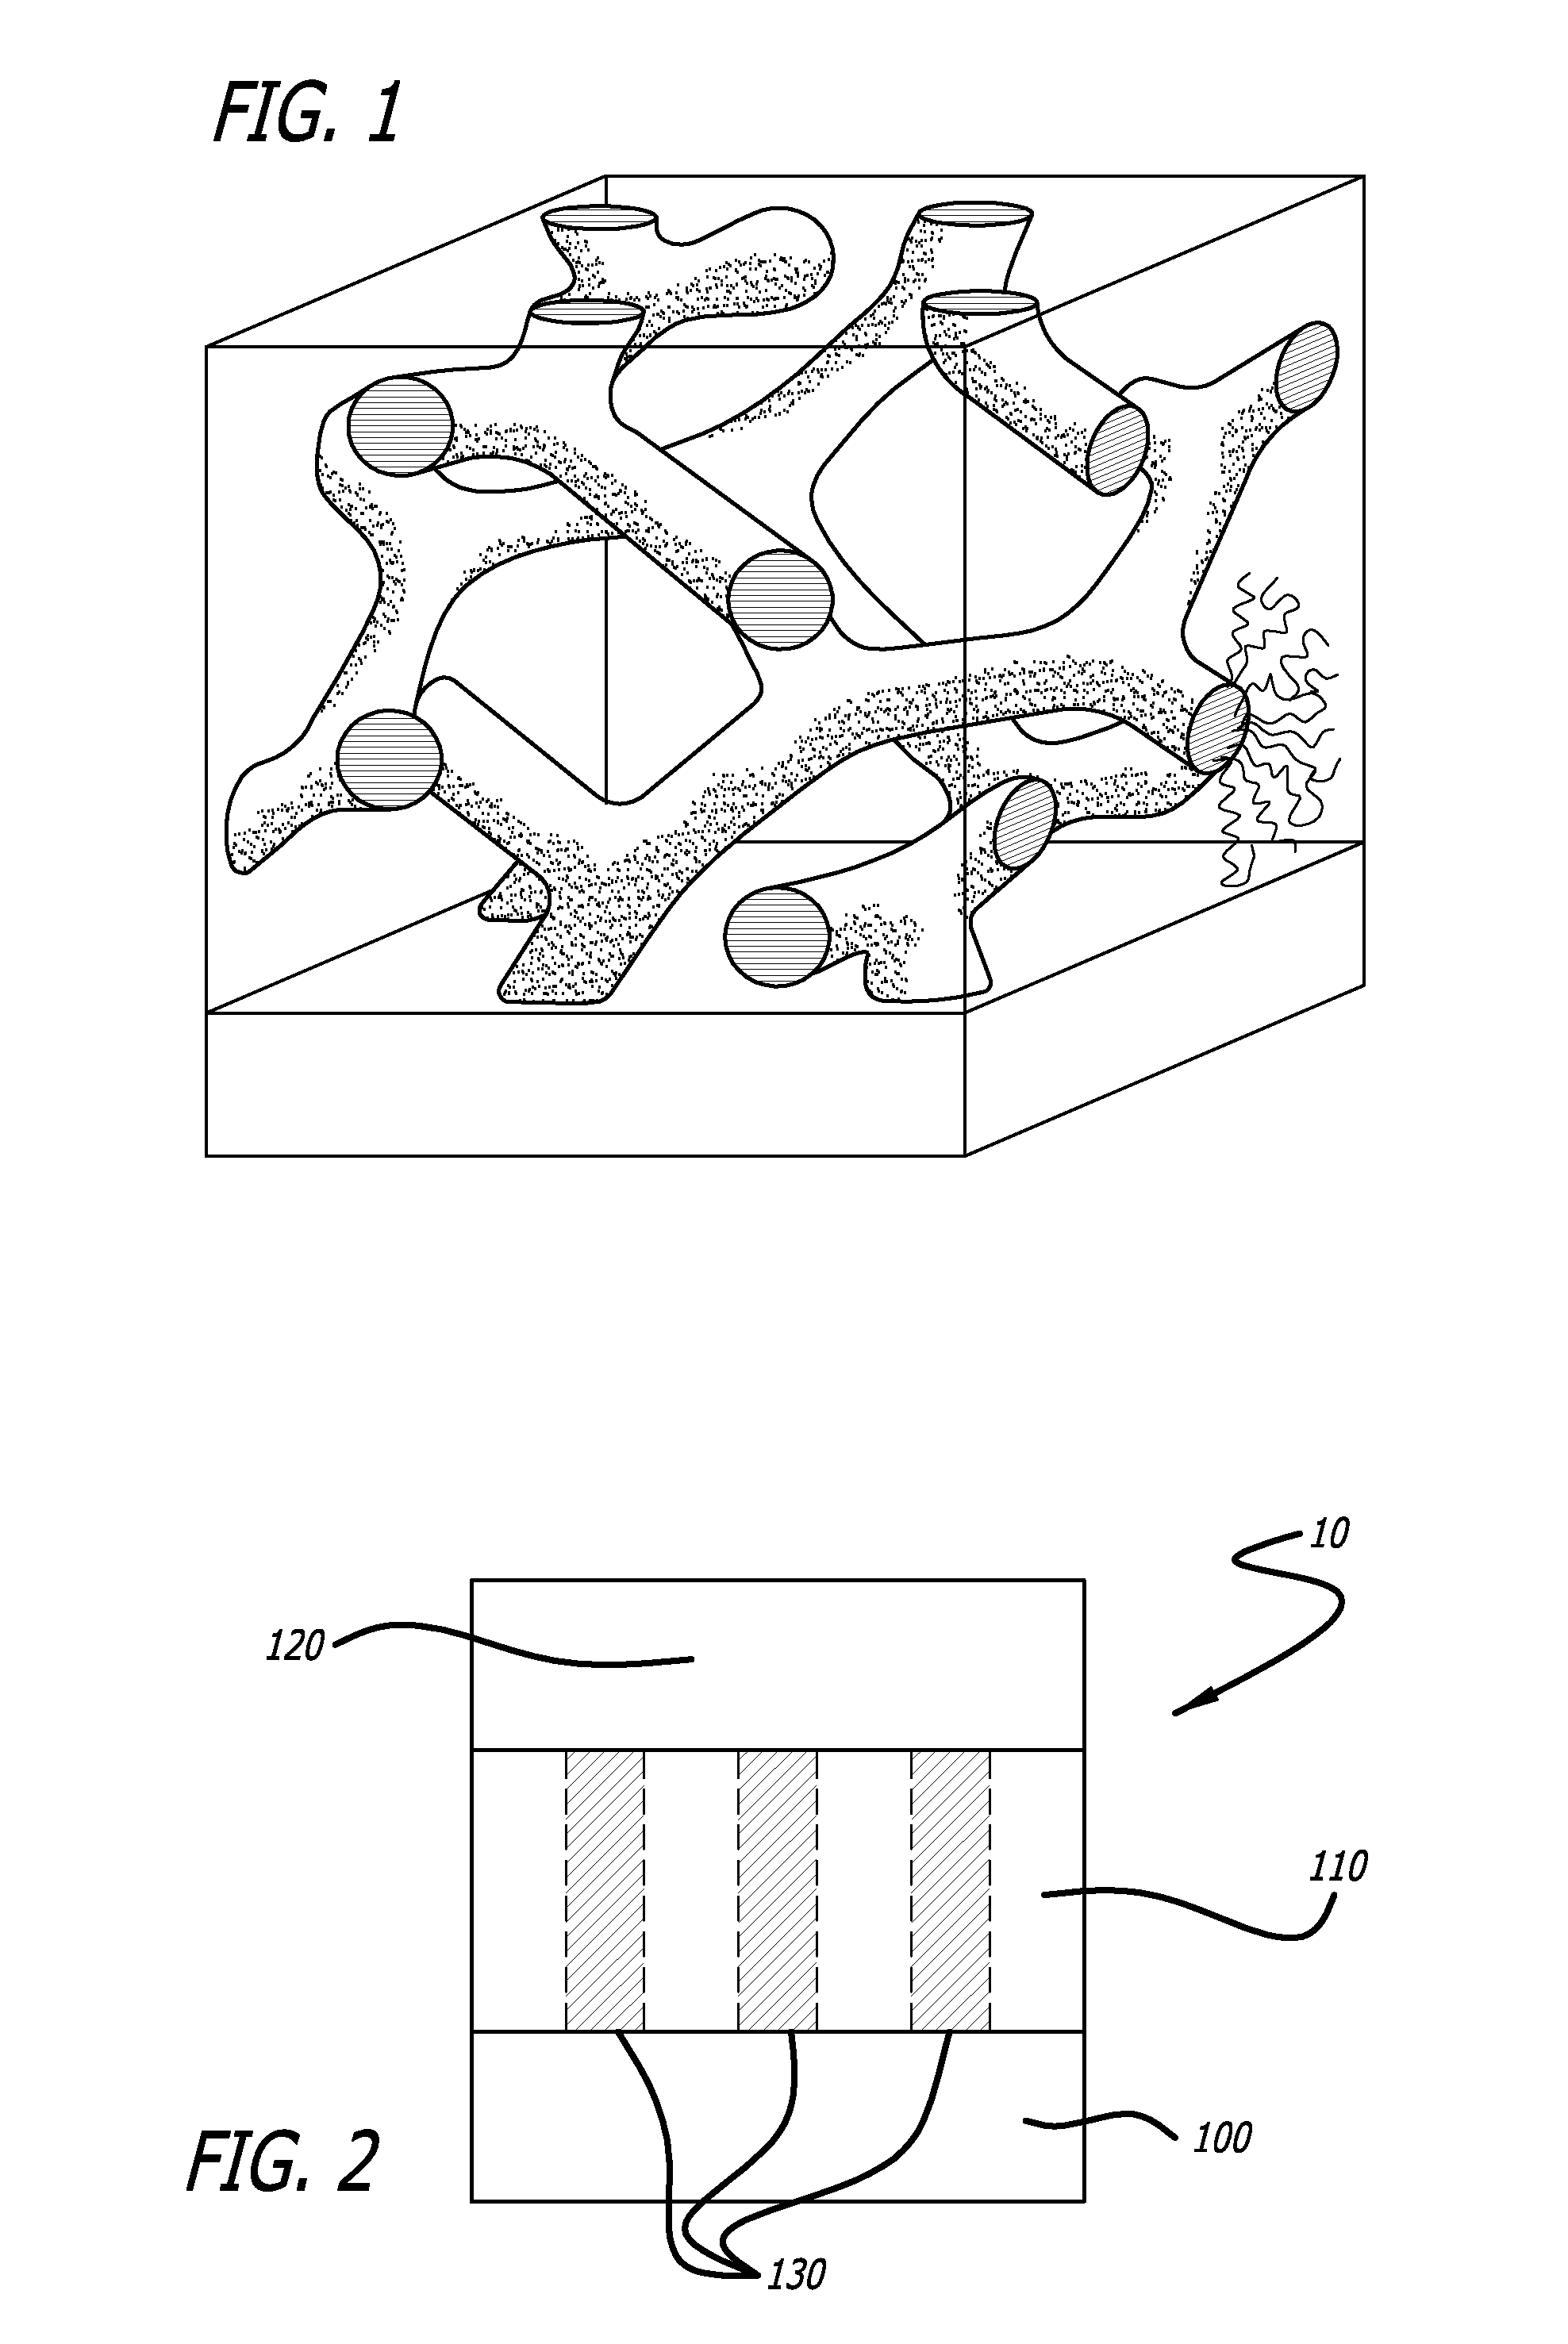 Bioactive Material Delivery Systems Comprising Sol-Gel Compositions